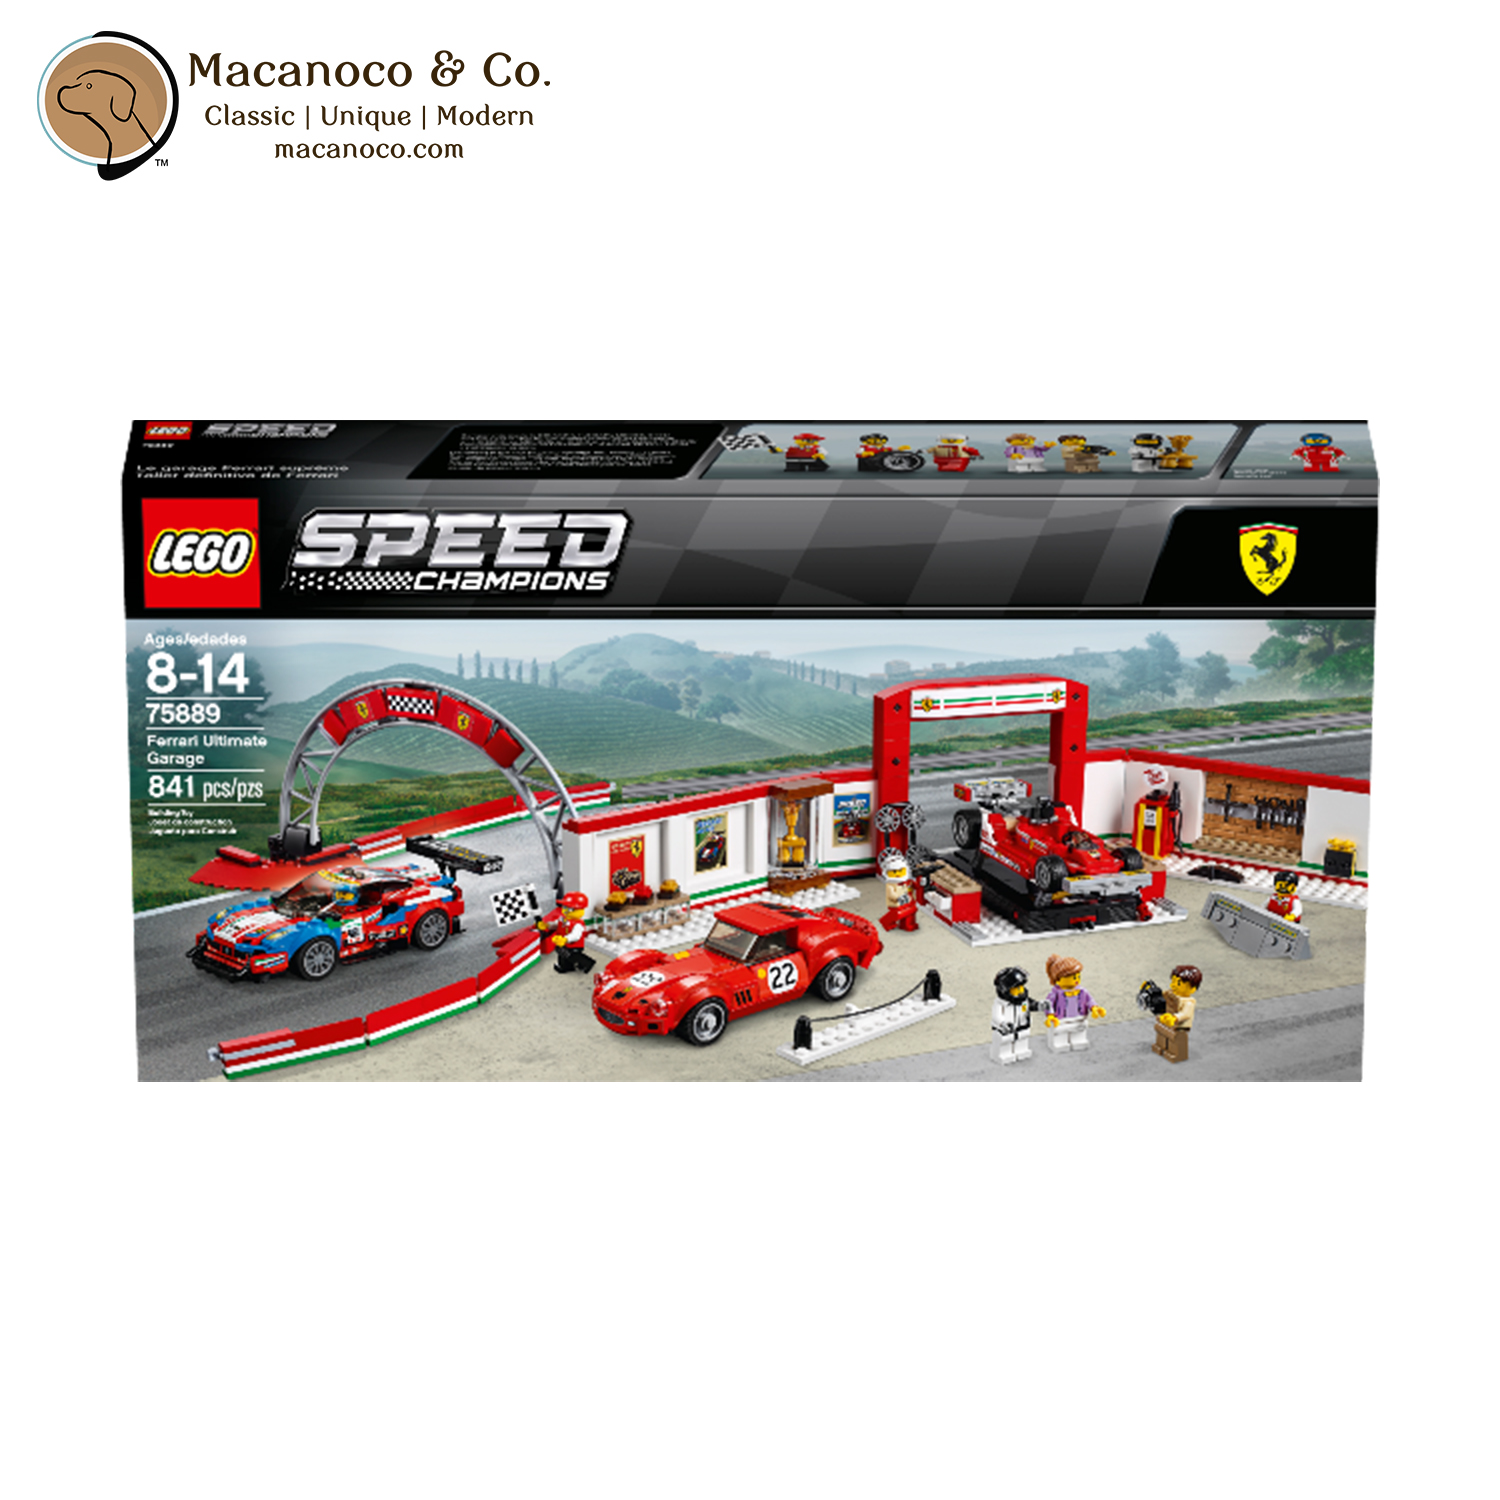 LEGO Speed Champions Ferrari Ultimate Garage Building Kit - Macanoco and Co.